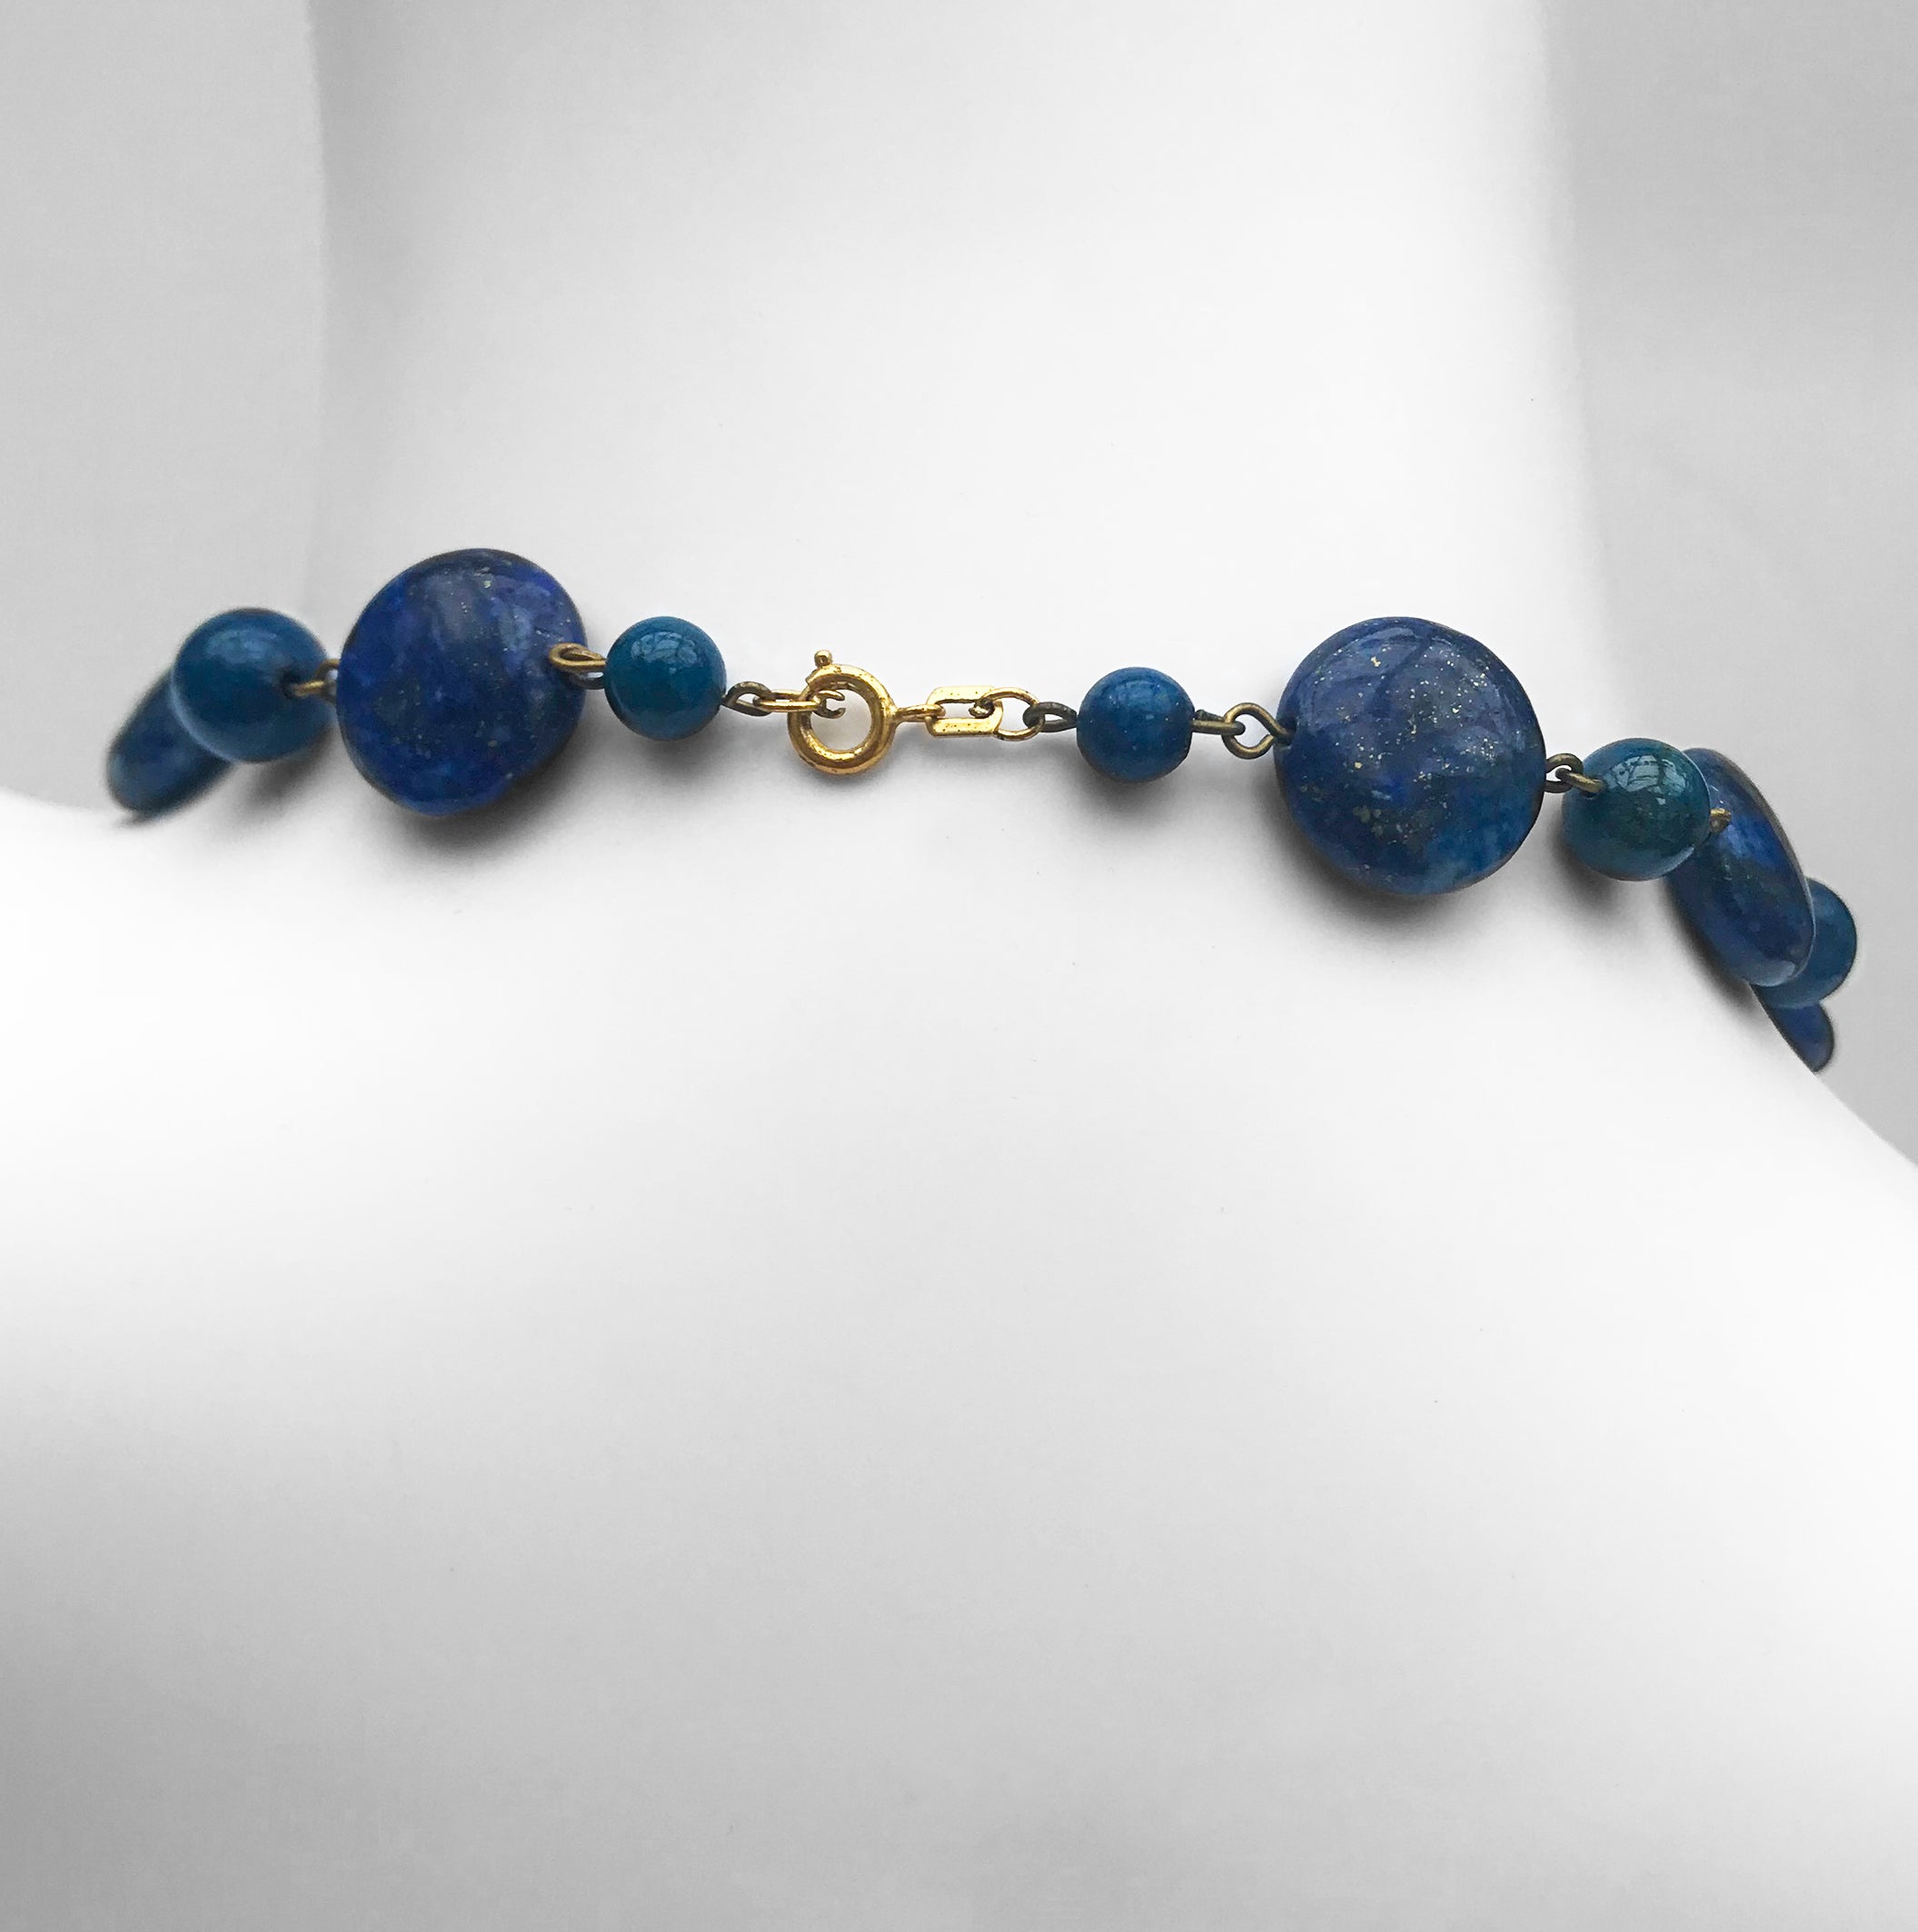 Vintage1930's Lapis Lazuli 1930's. Find this and other Vintage jewellery for sale at Intovintage.co.uk. Into Vintage